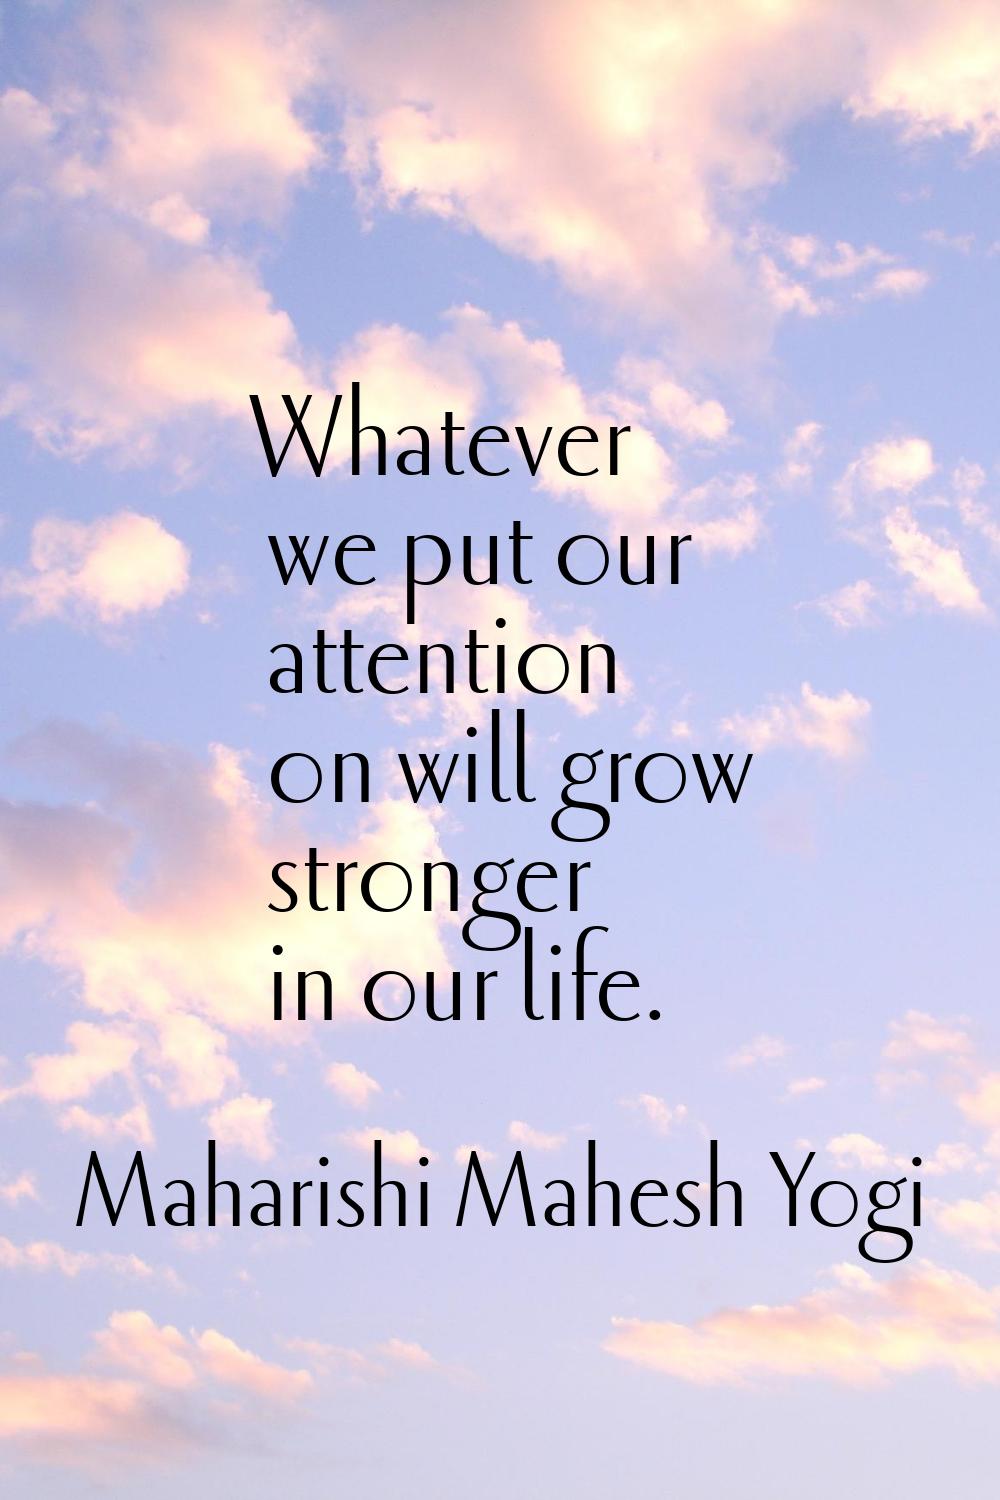 Whatever we put our attention on will grow stronger in our life.